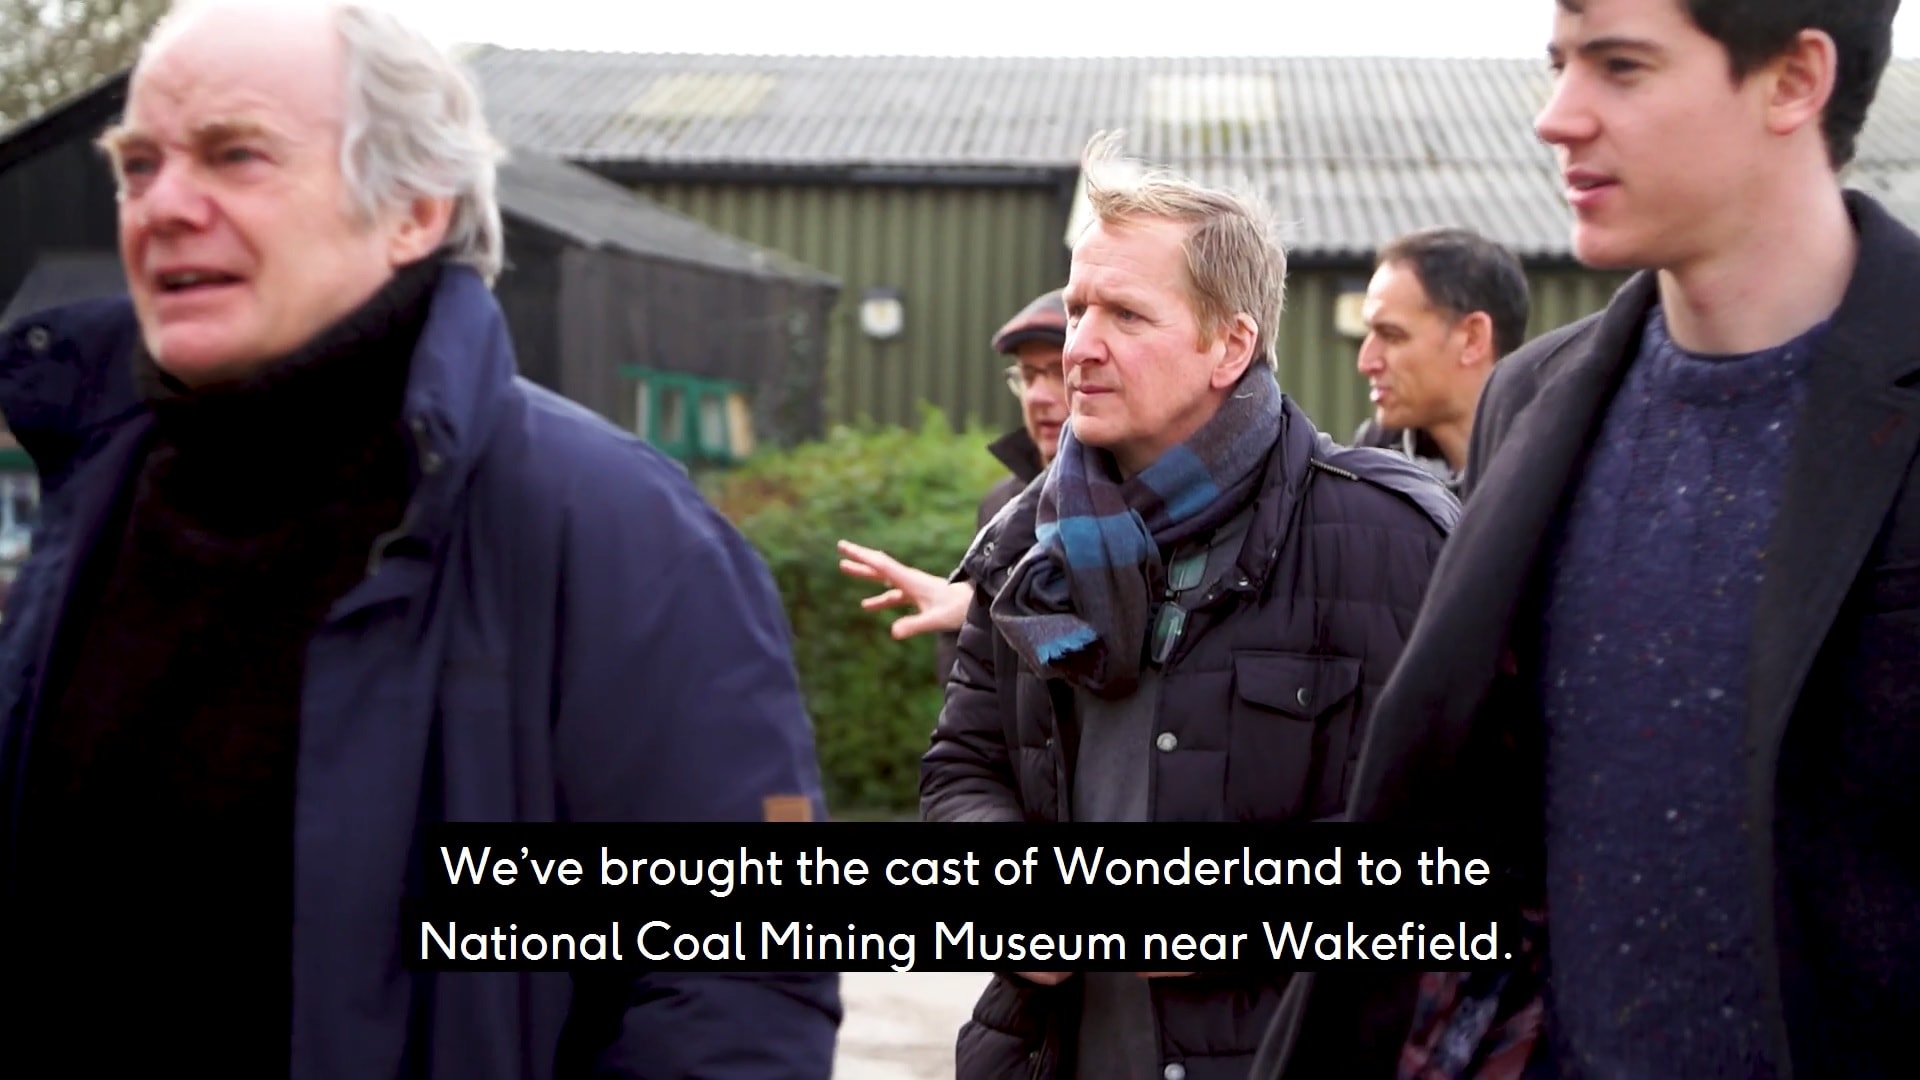 The cast of Wonderland at the National Coal Mining Museum